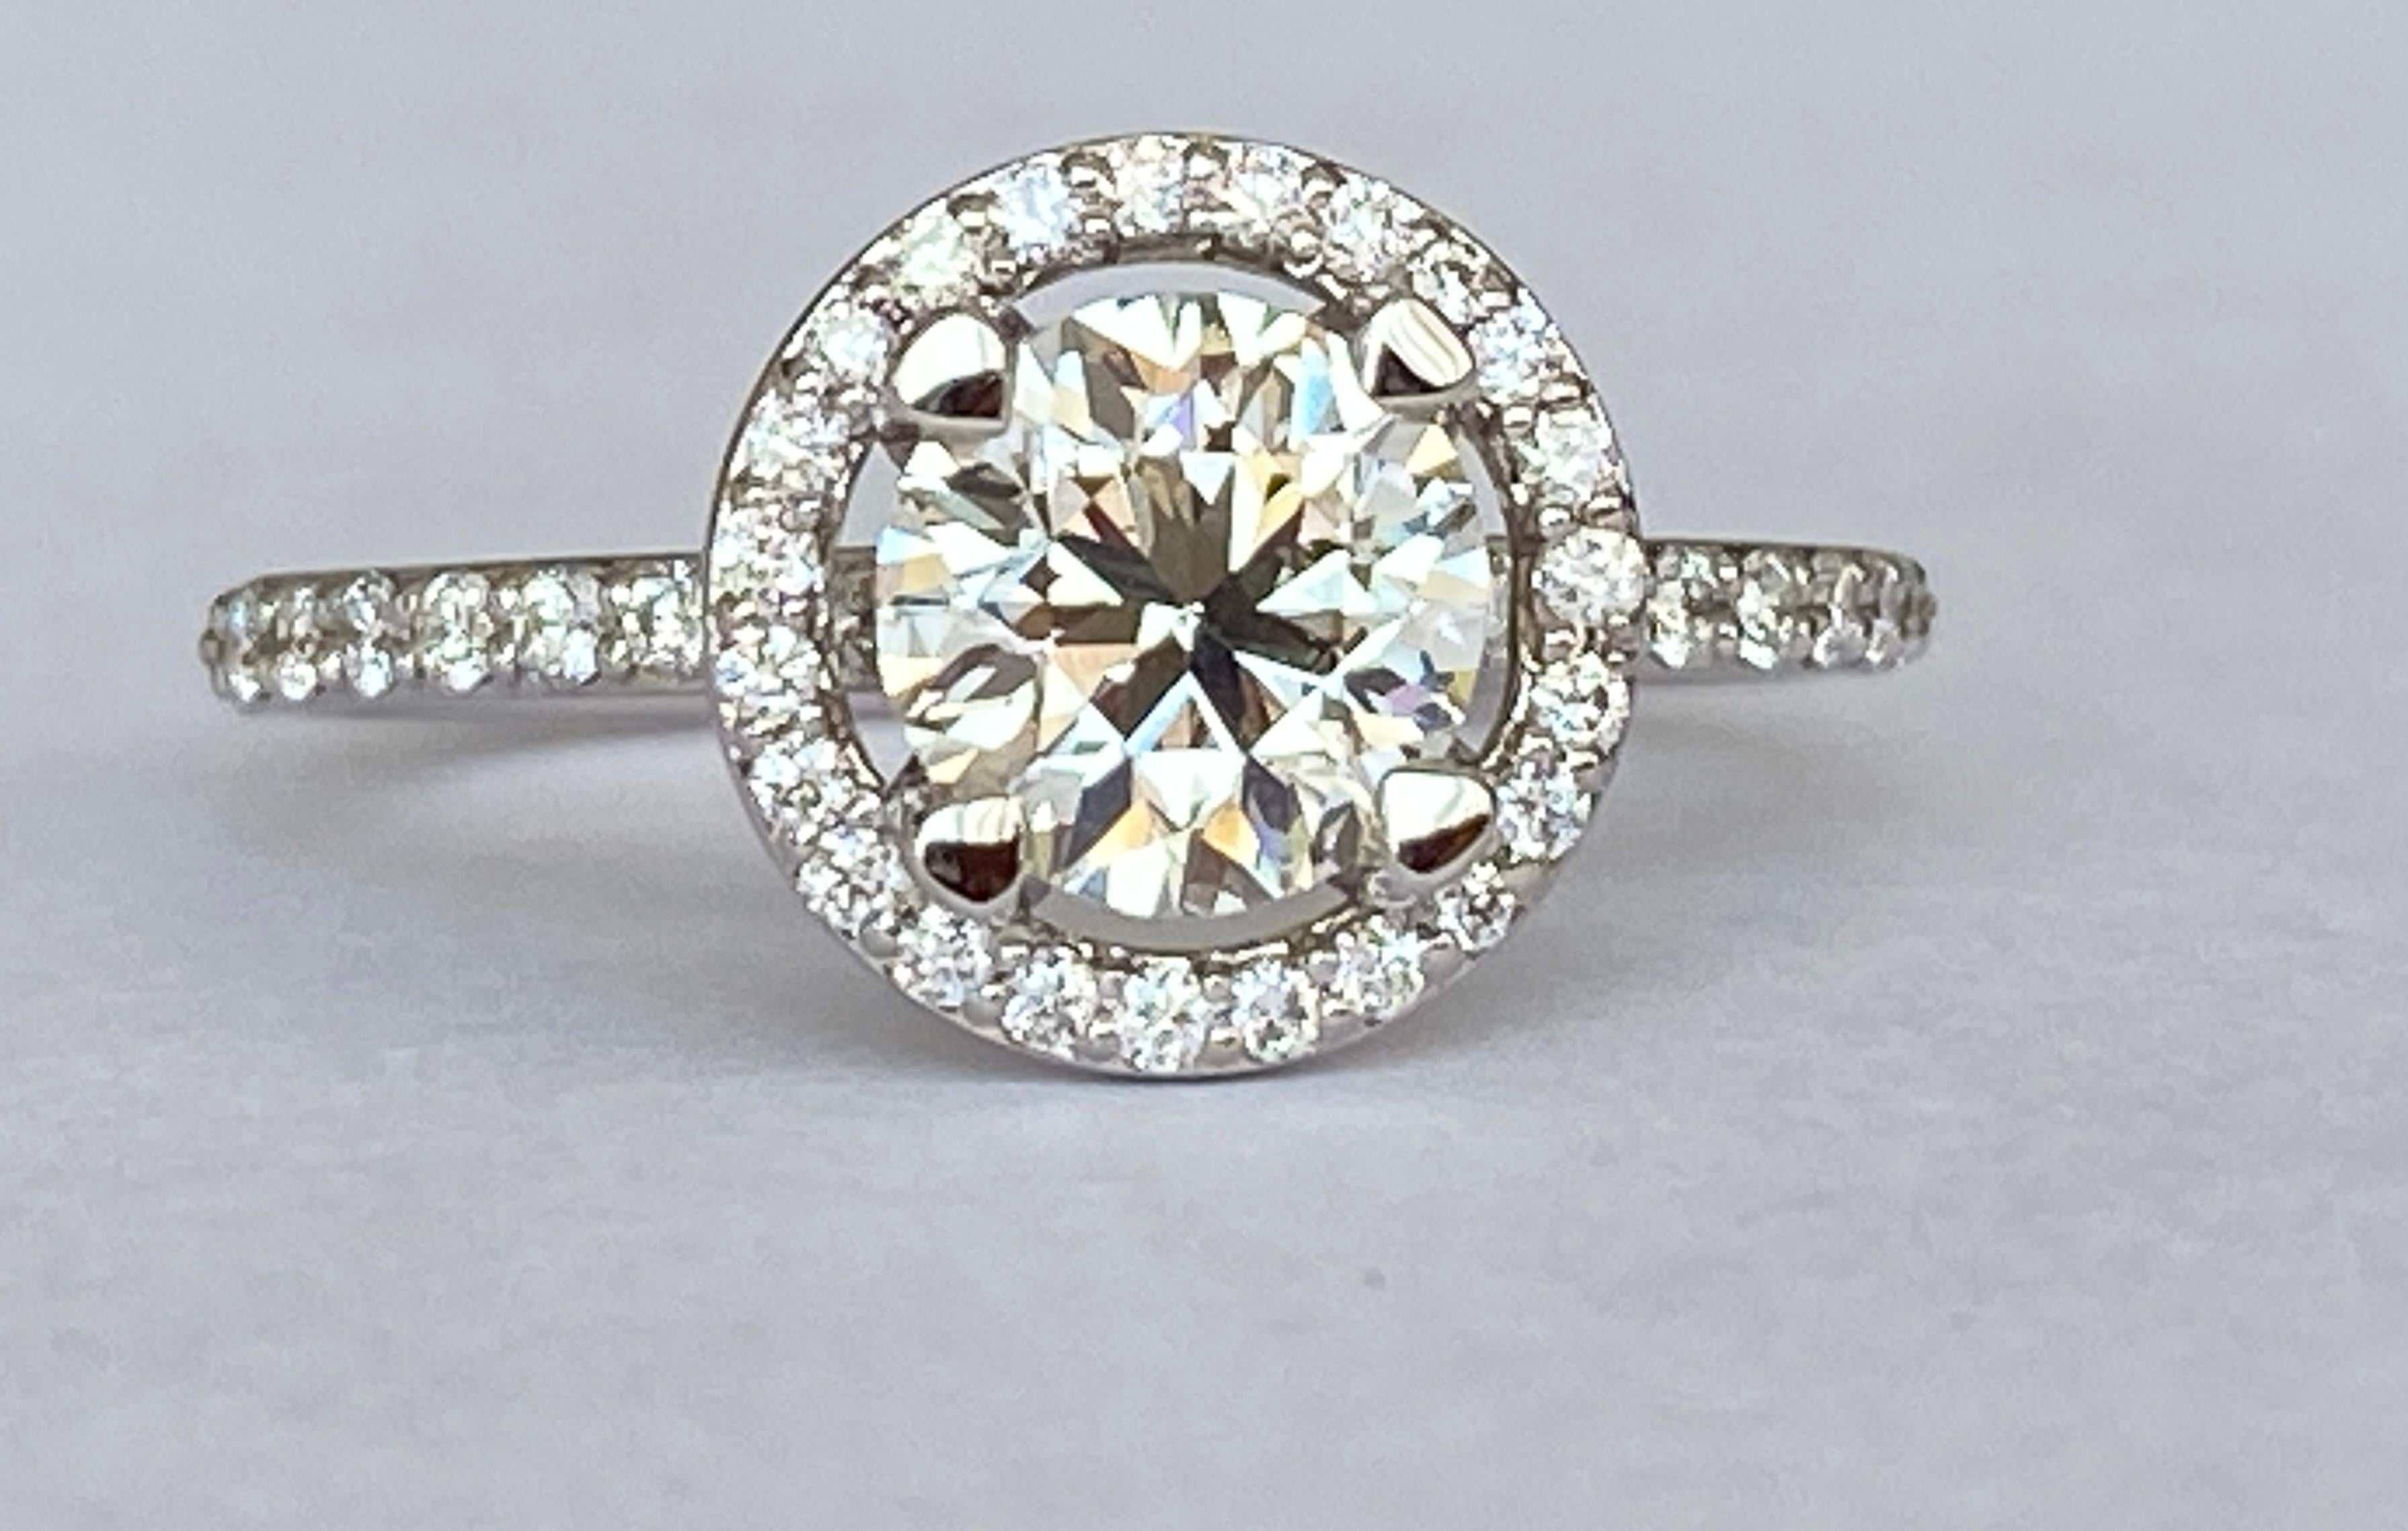 Solitaire ring in 18 kt white gold with a brilliant cut diamond of 1.08ct quality K/VS1 and 37 brilliant cut diamonds of approx 0.28 ct in total,F/ G/VS.
Grade: 18 kt (marked 750) 
Weight: 3.16 gram 
Ring Size: 17.50 mm /7 USA size
Comes in a ring